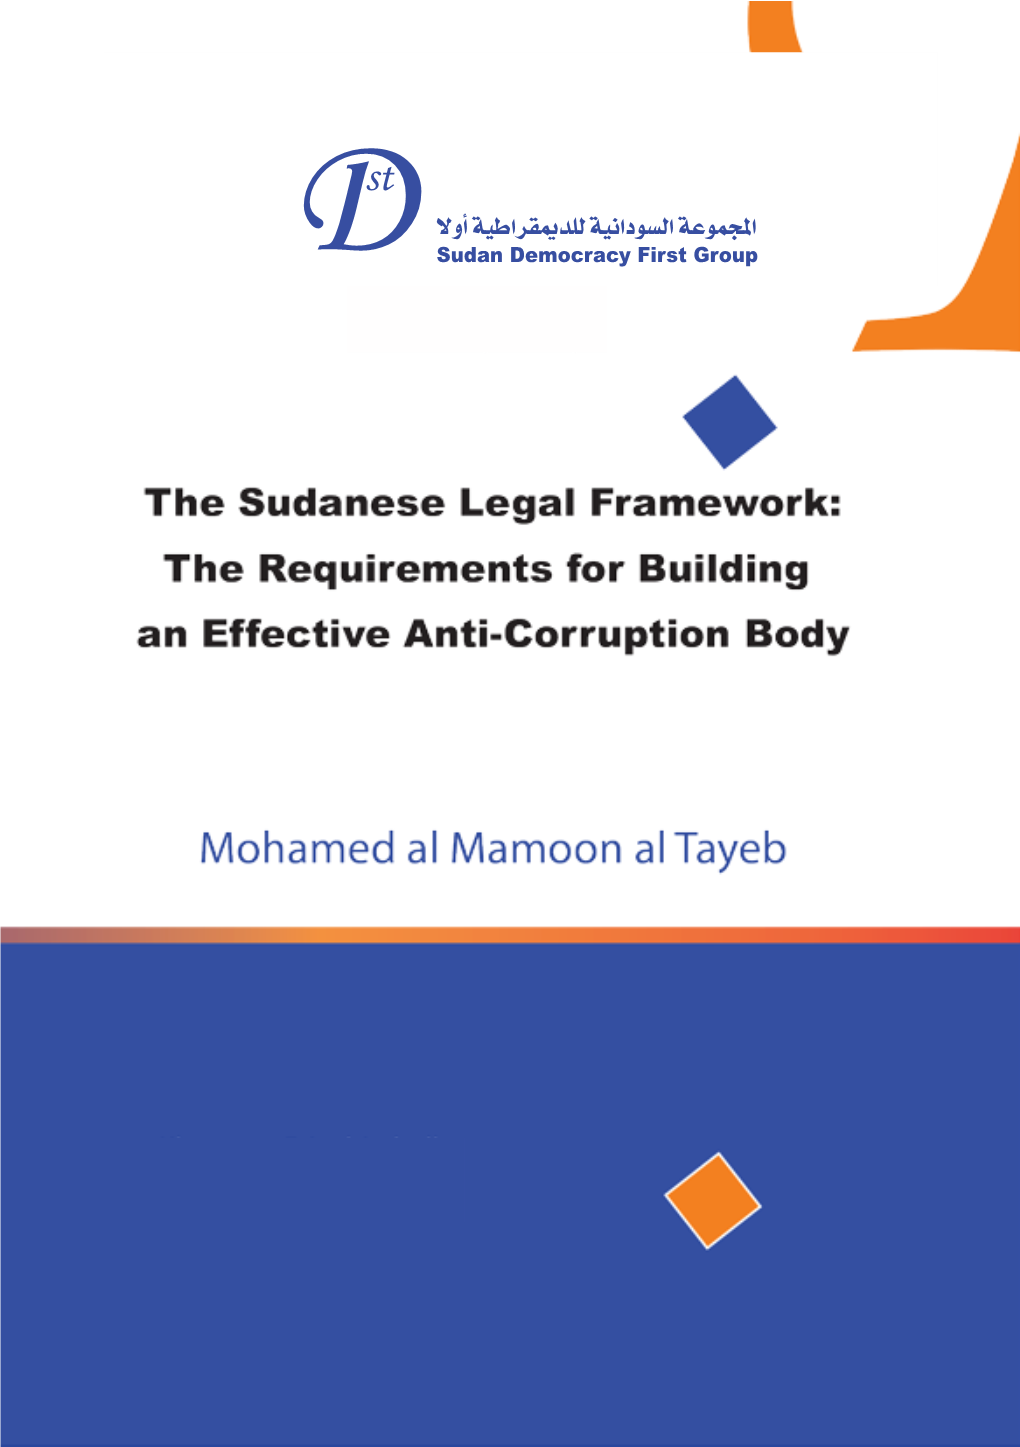 The Legal Framework for an Effective Sudanese Anti-Corruption